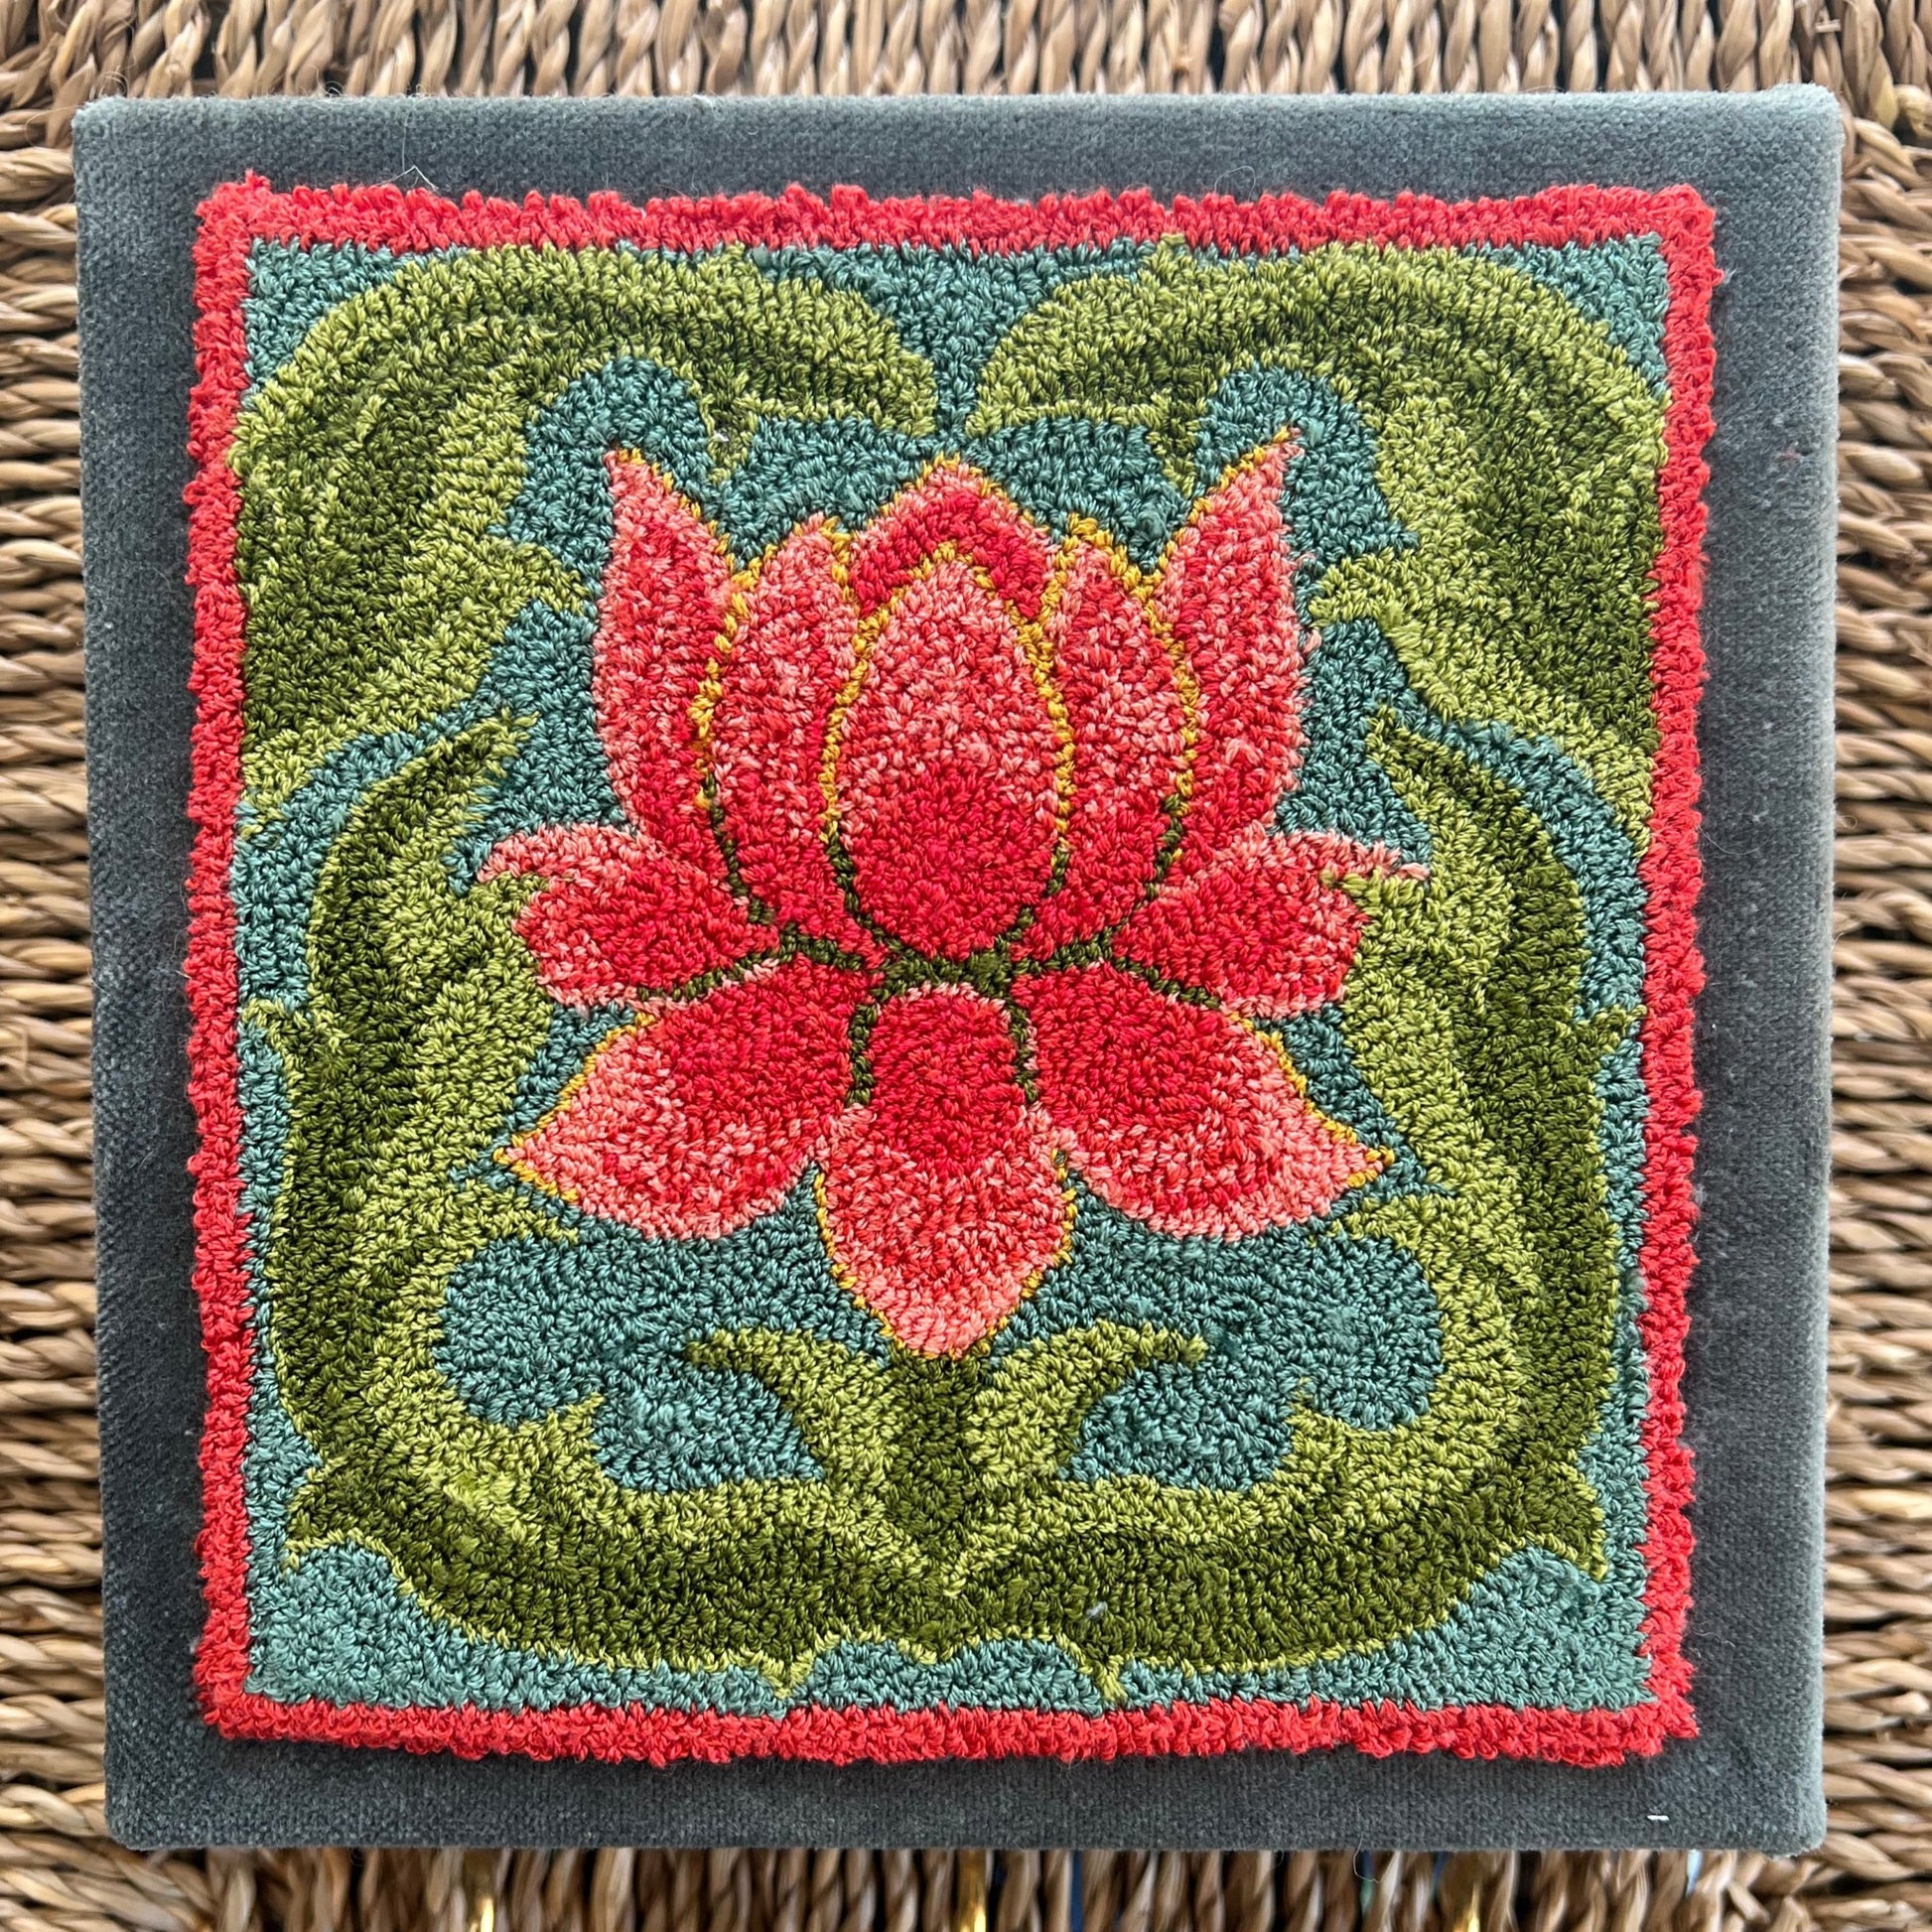 Blooming-Punch Needle Pattern With DMC Floss thread kit, available as a Paper or Cloth Pattern by Orphaned Wool.